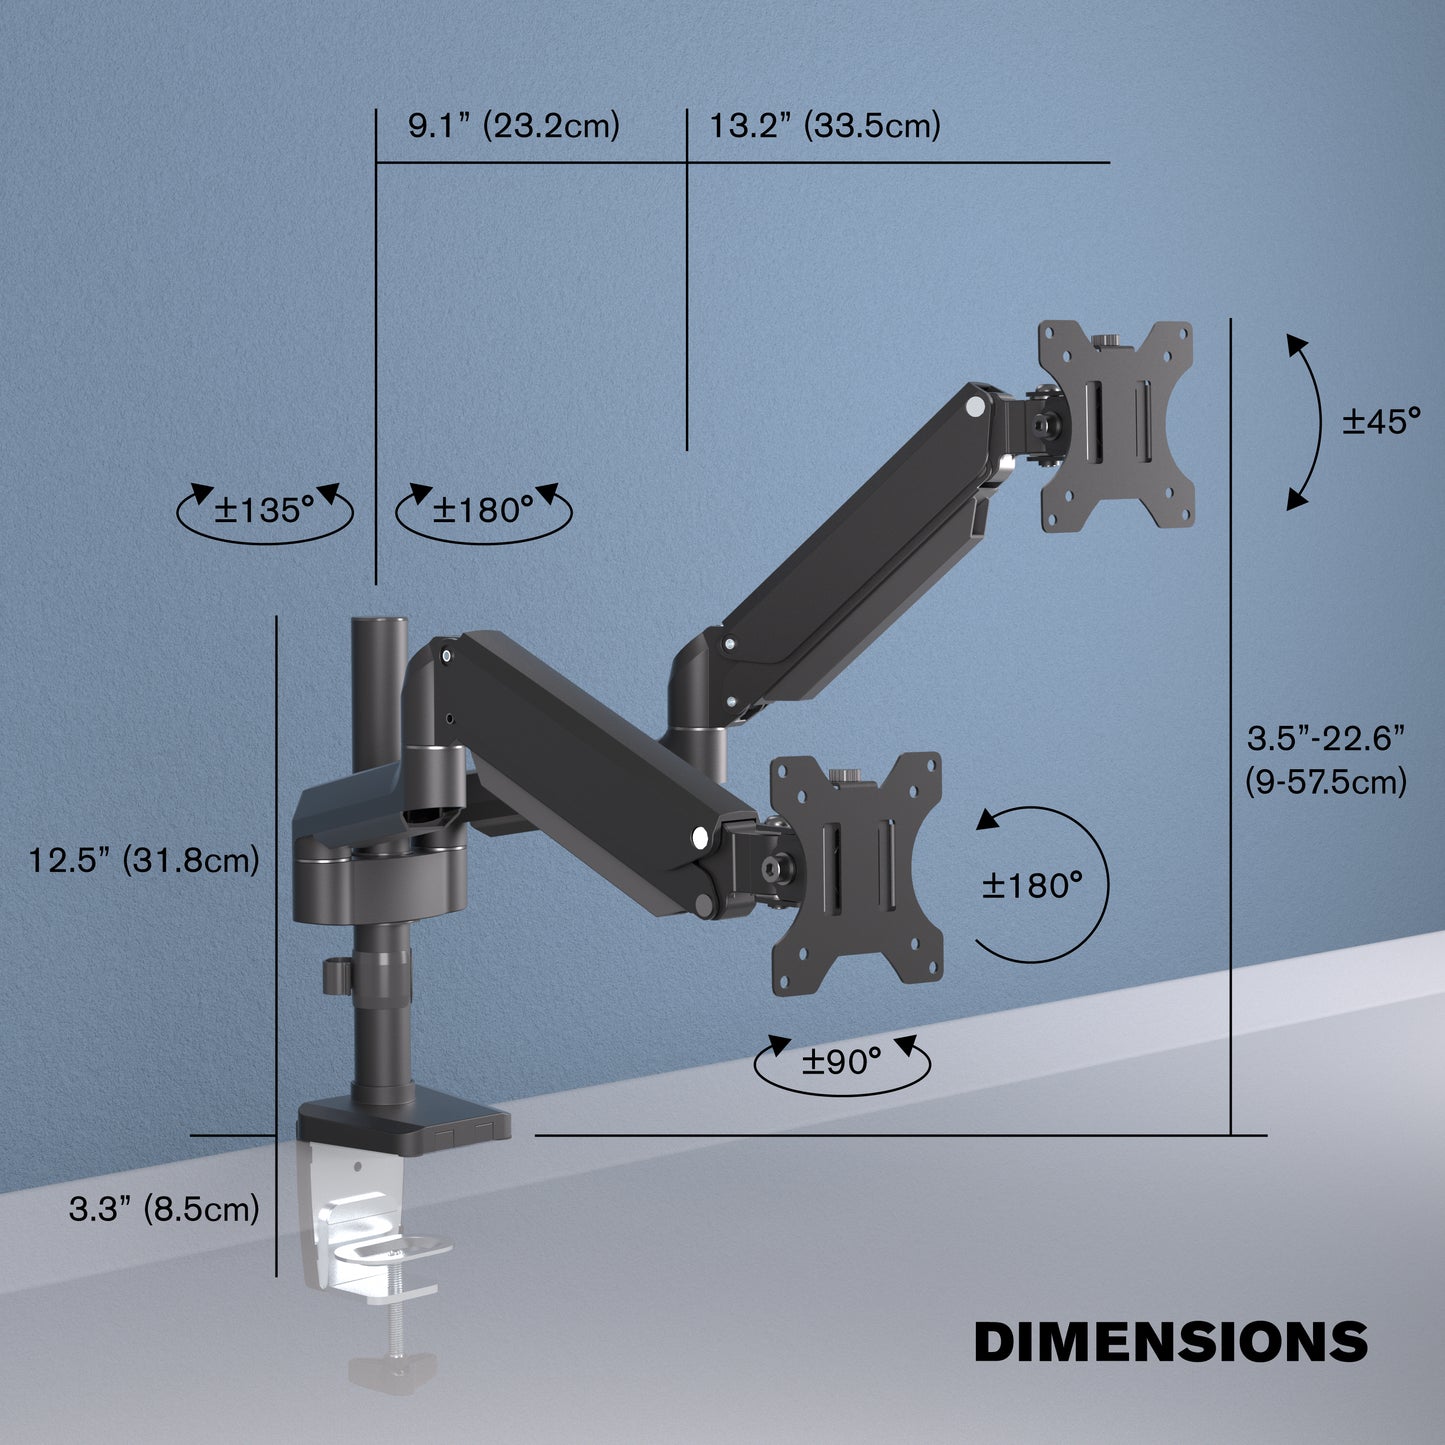 ProMounts Landscape to Portrait Double Monitor Arms for 13" to 32" Screens Holds up to 17.6 lbs